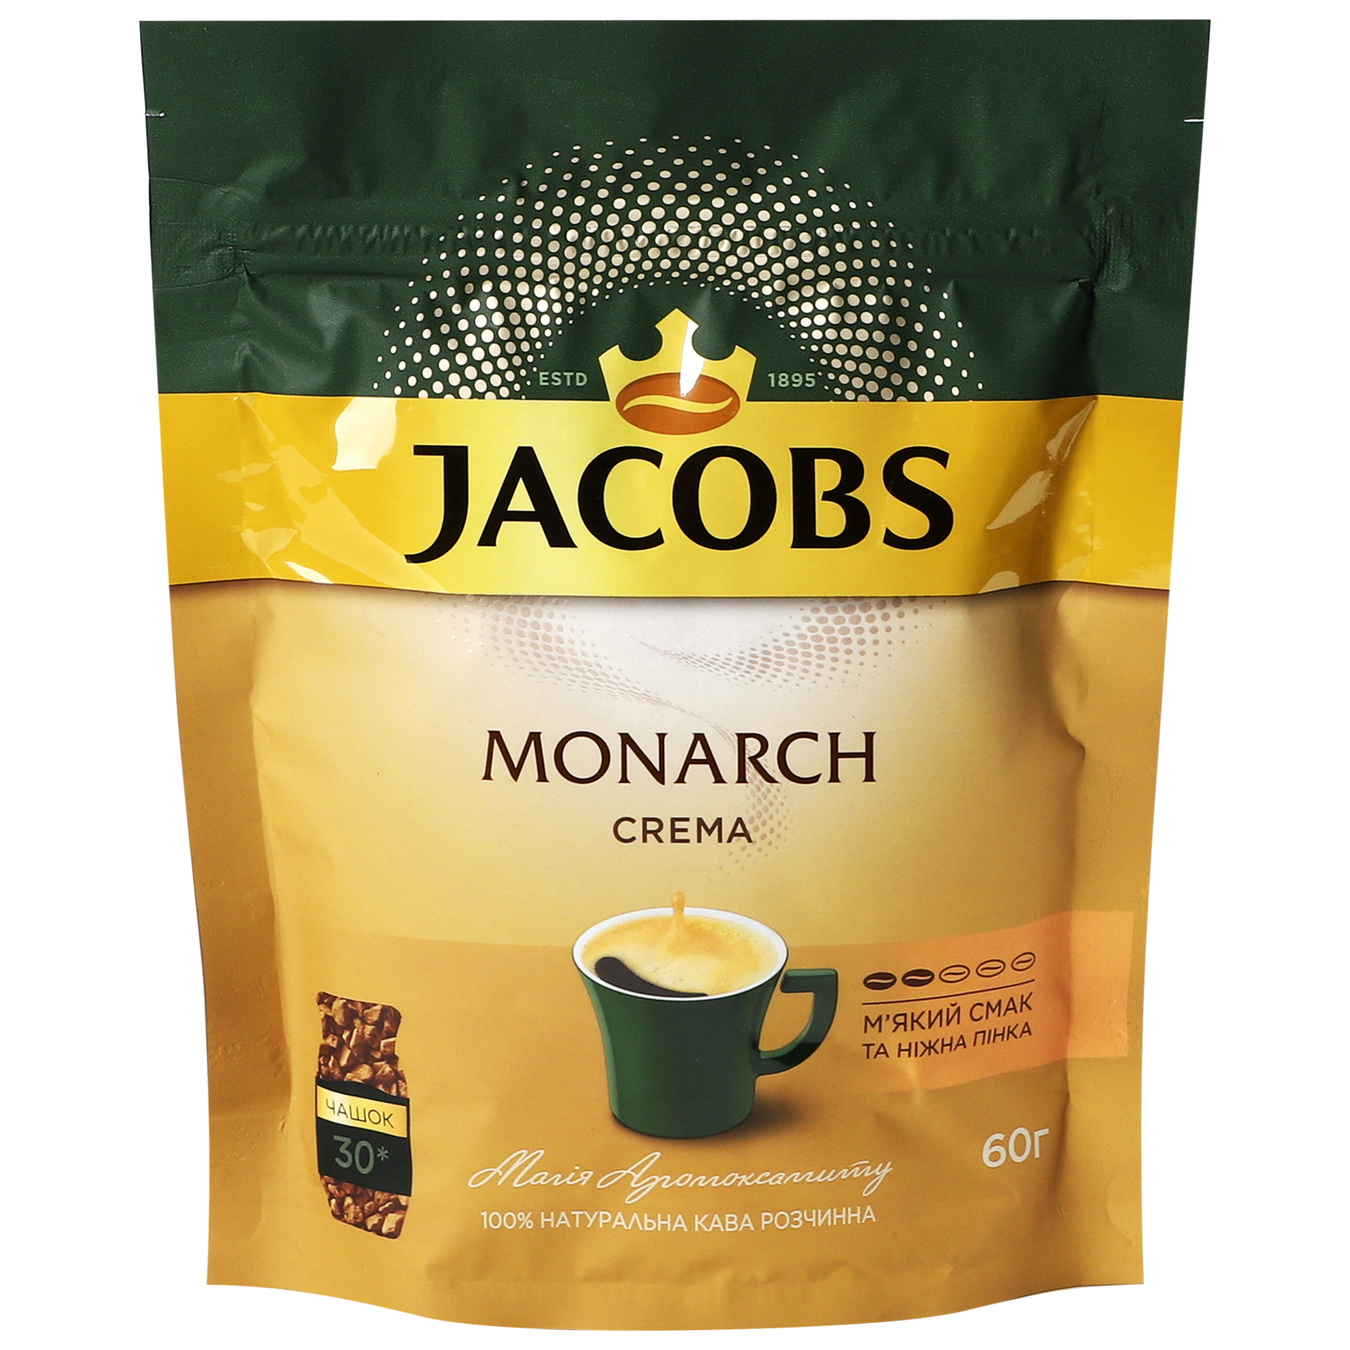 Jacobs Monarch Crema instant coffee 60g